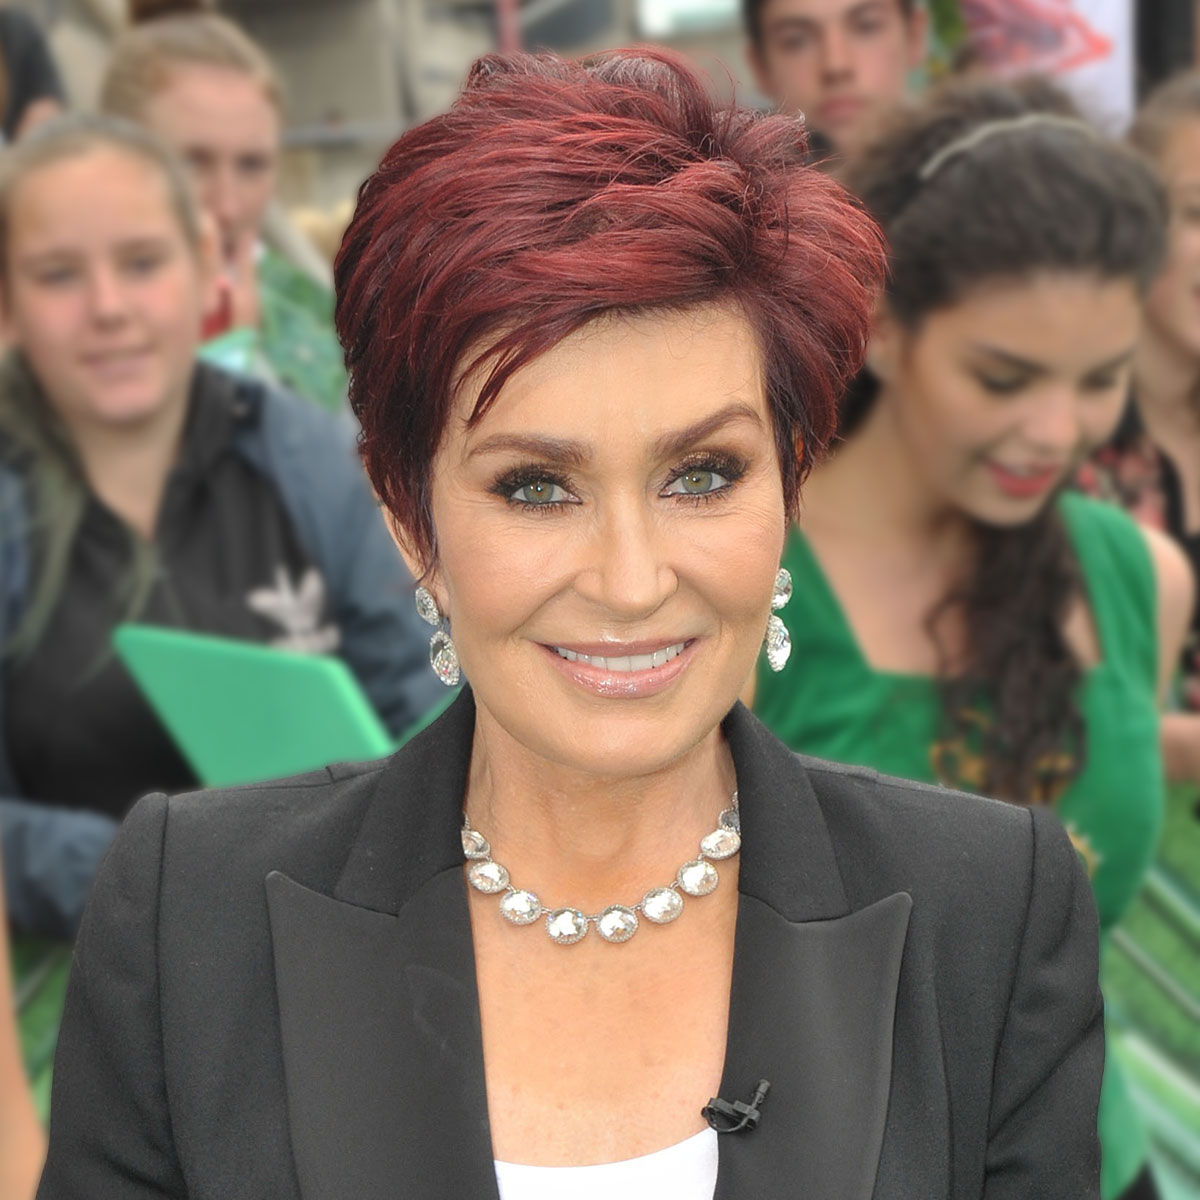 Sharon Osbourne Shows Off Her 30-Lb Weight Loss After Admitting To Using Ozempic https://t.co/fBmtwnnFZs https://t.co/gMjvze4I6g